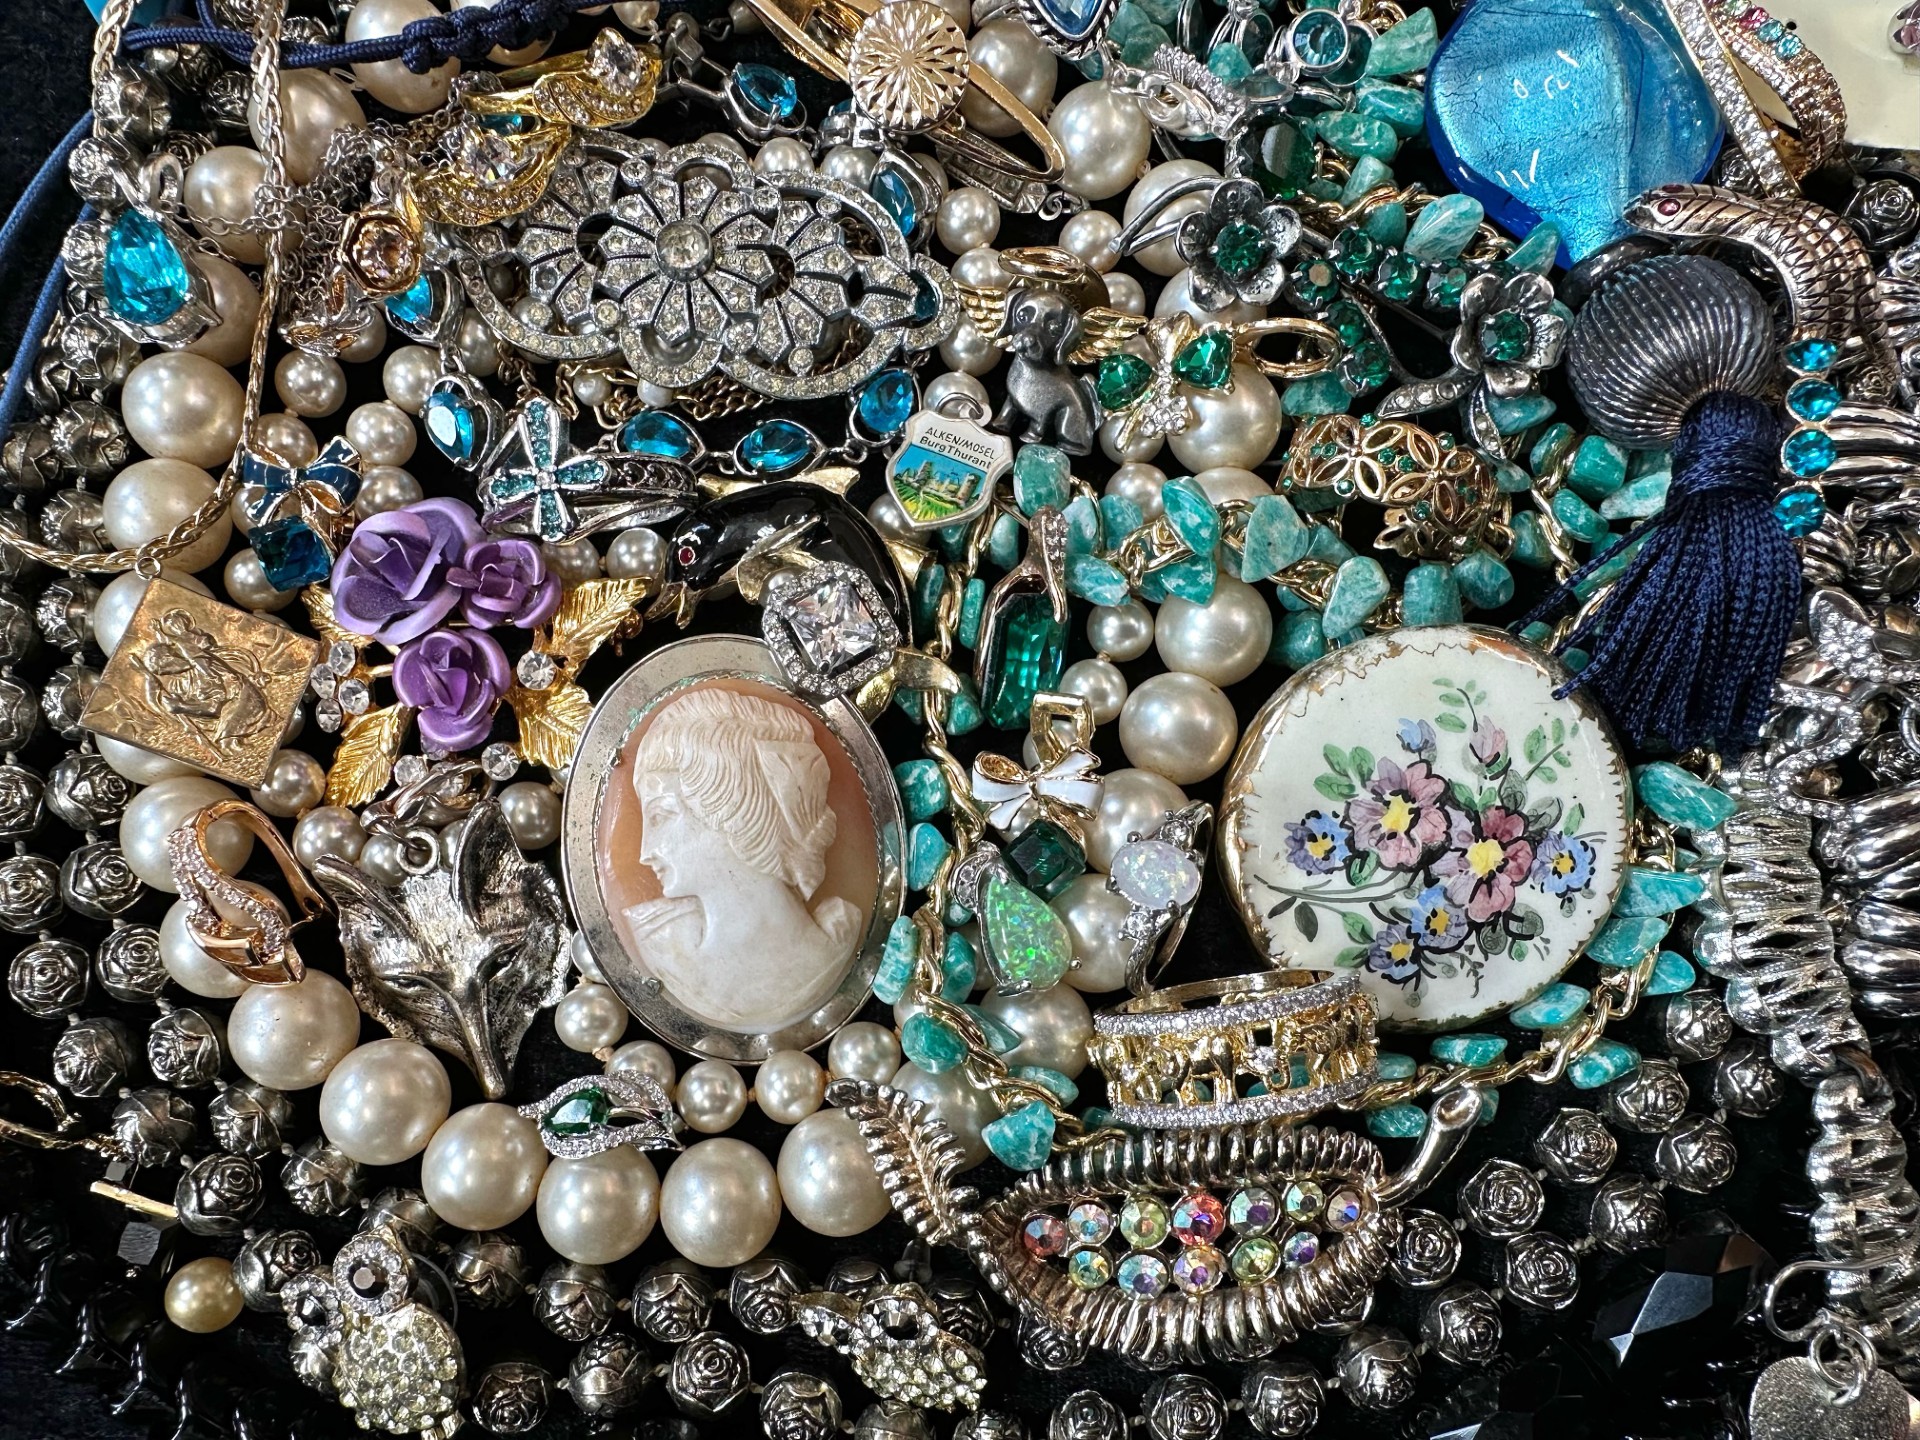 Collection of Vintage Costume Jewellery, comprising beads, earrings, necklaces, brooches, bracelets, - Image 2 of 5